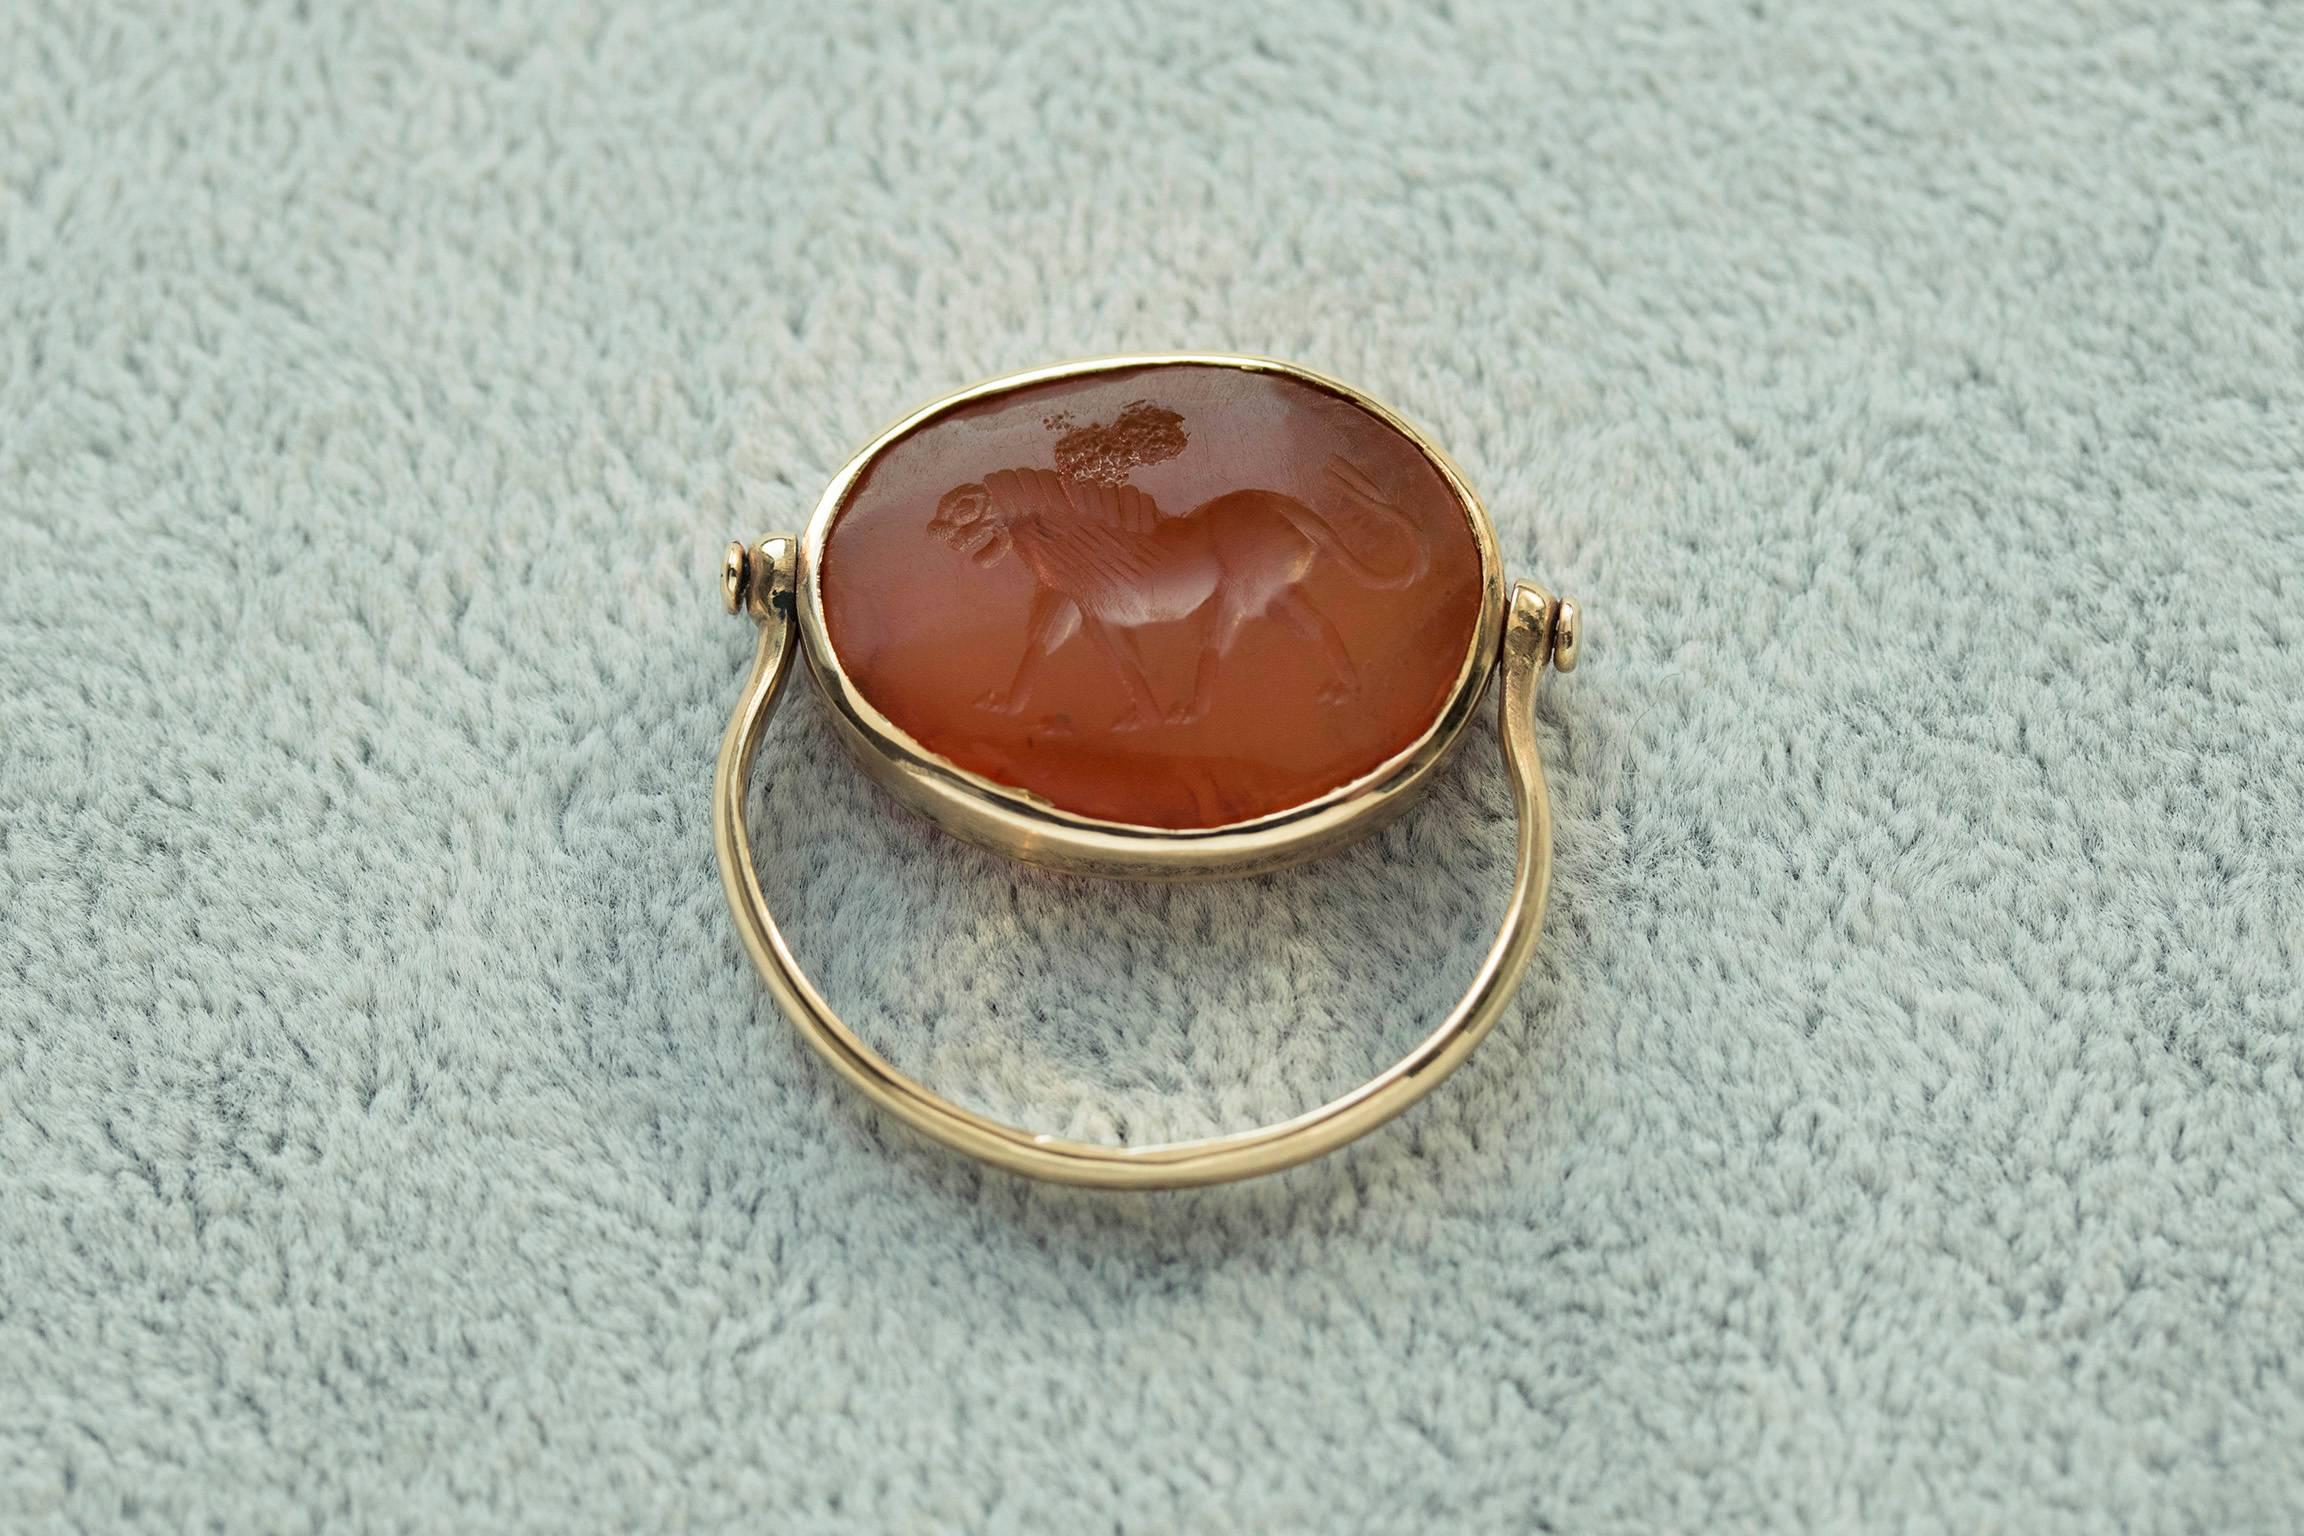 An impressive Sasanian (Neo-Persian, a.k.a Sassanian) lion intaglio ring. This carnelian intaglio is circa 600 A.D, and the oldest one we've had. The ring is set with a contemporary 18k yellow gold swivel mounting. Lion symbolizes power, strength